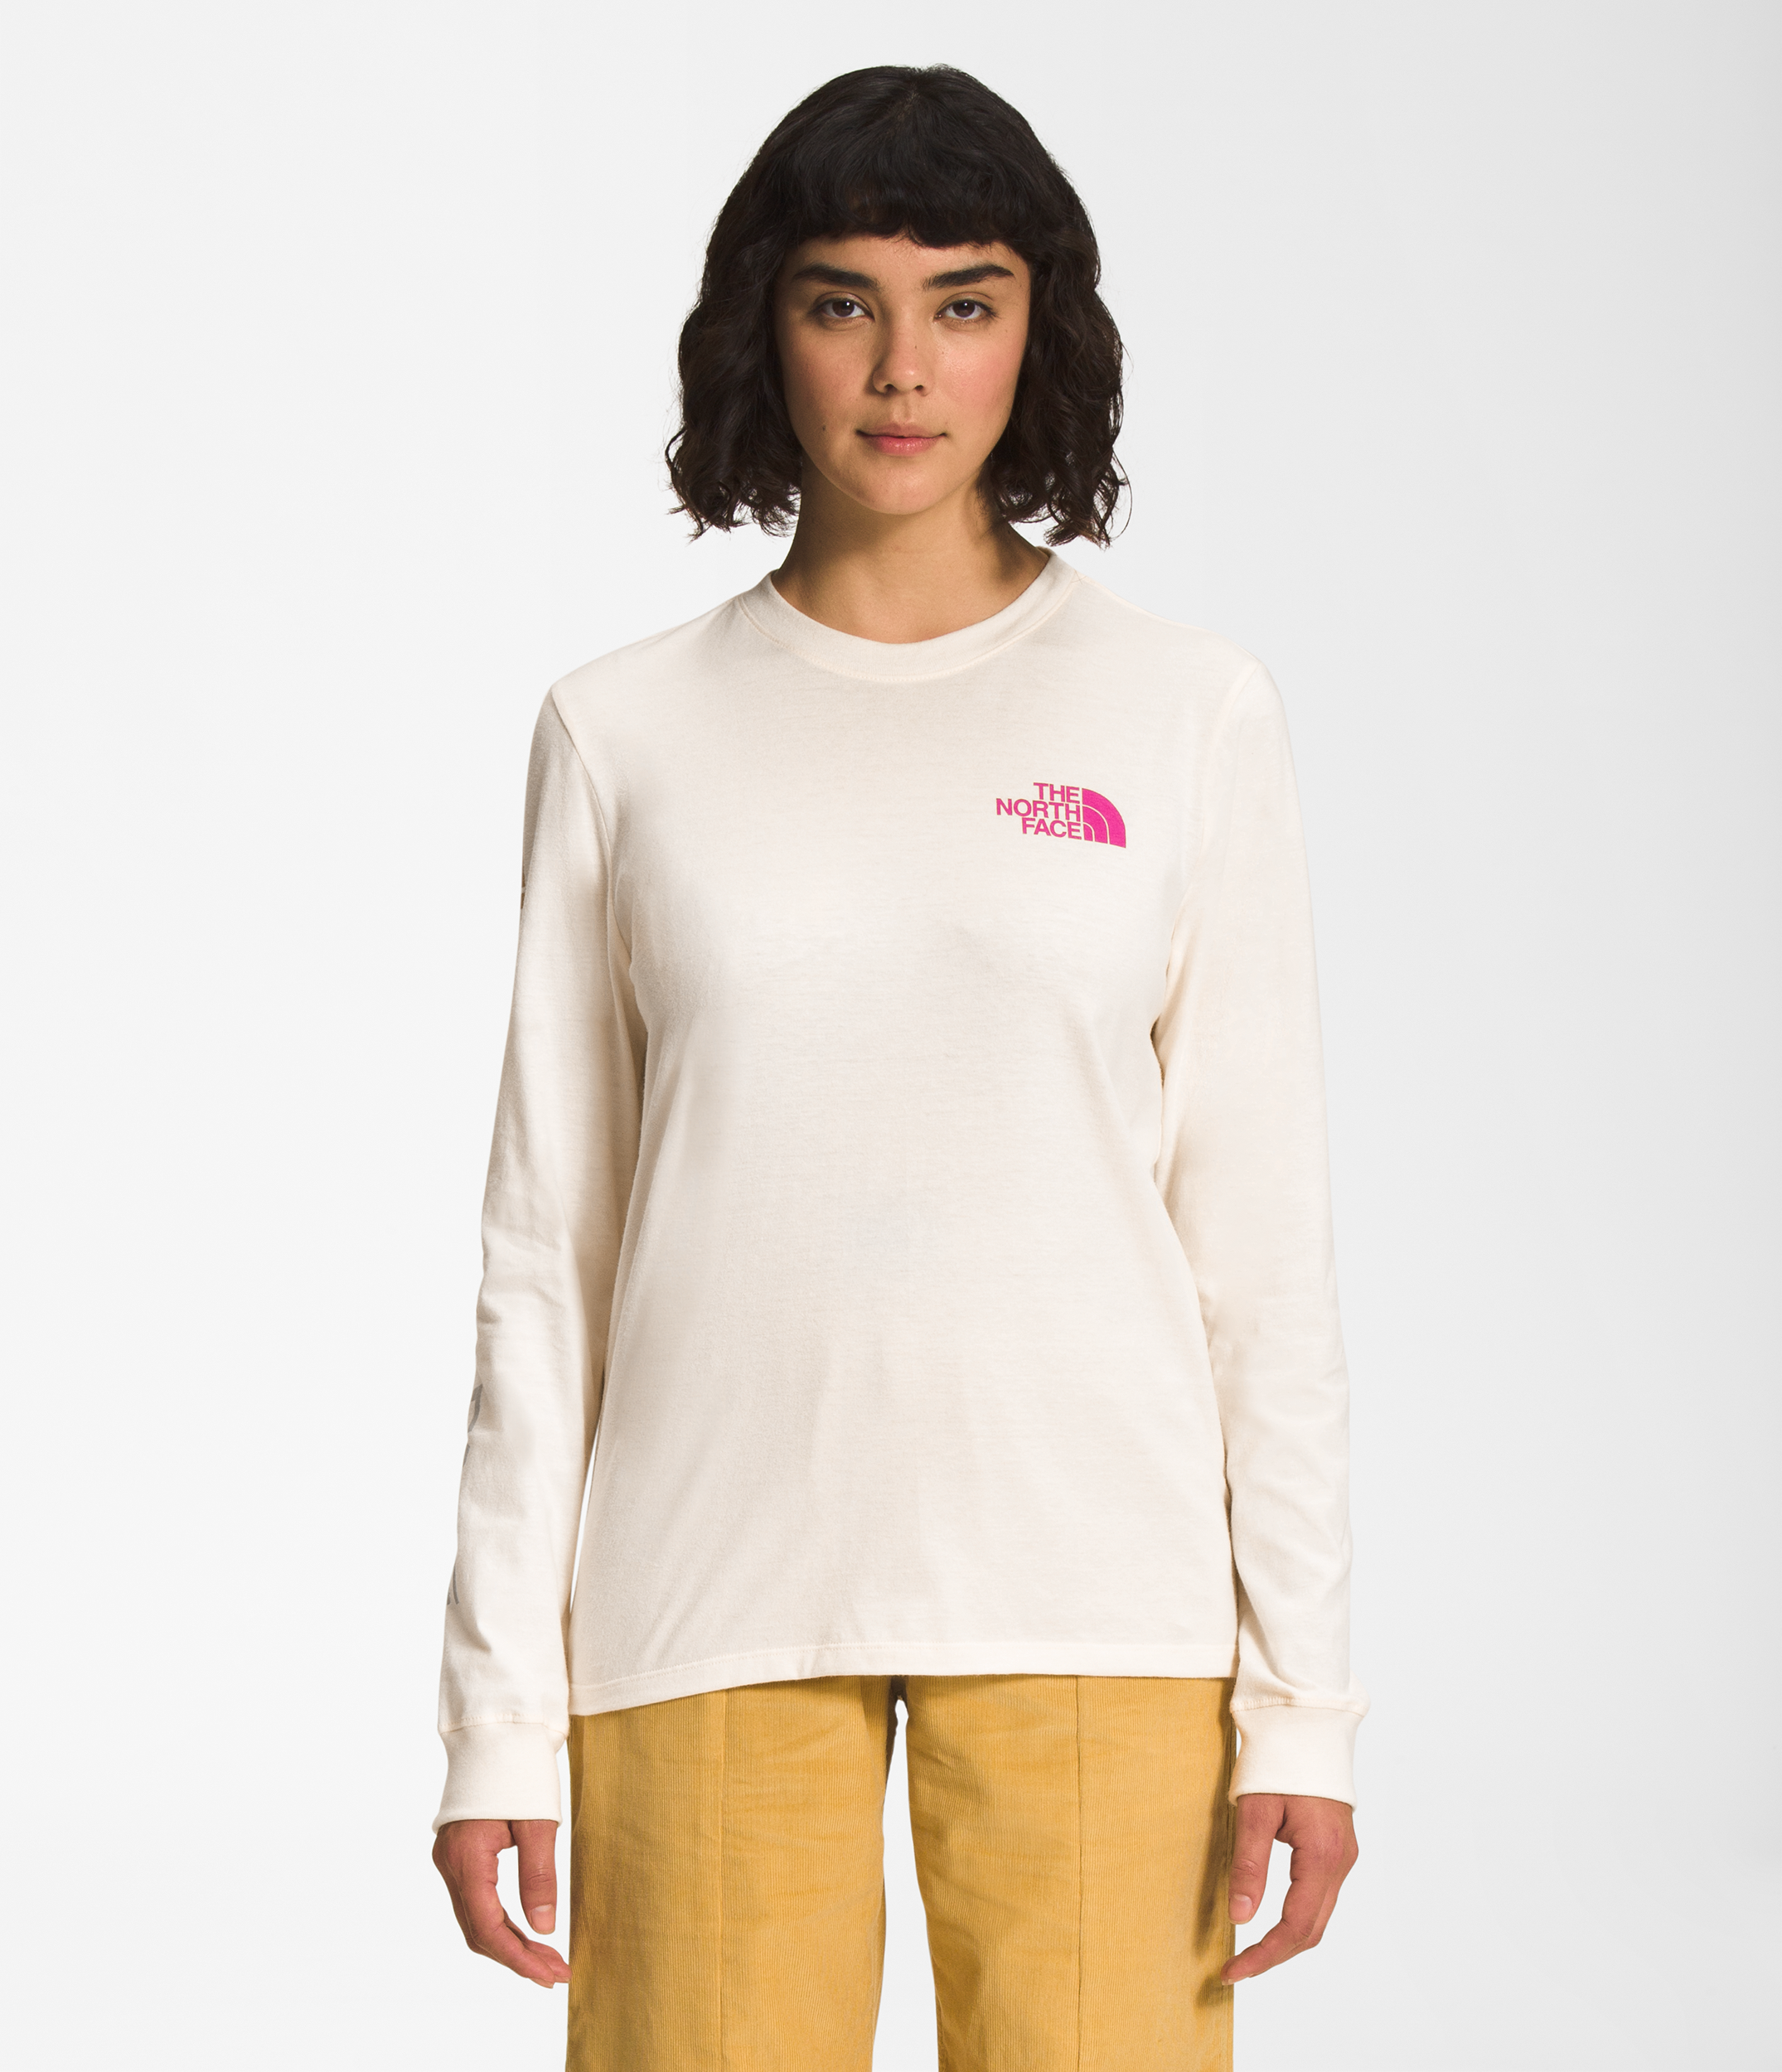 North Face - Women's North Face Brand Proud Long Sleeve Tee - Ombre - Image 1